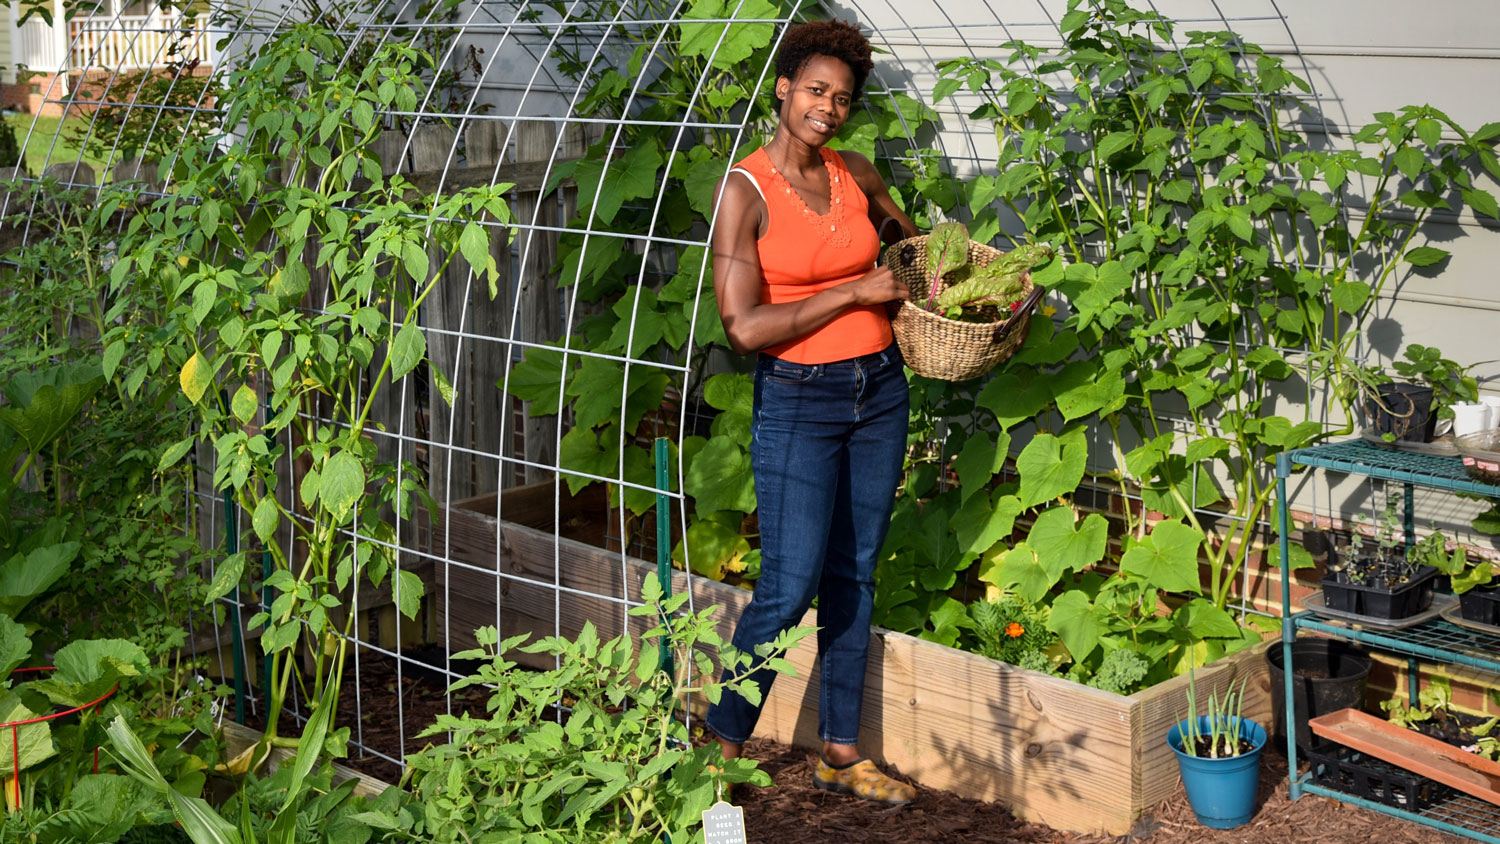 A young black woman in a garden holding a basket